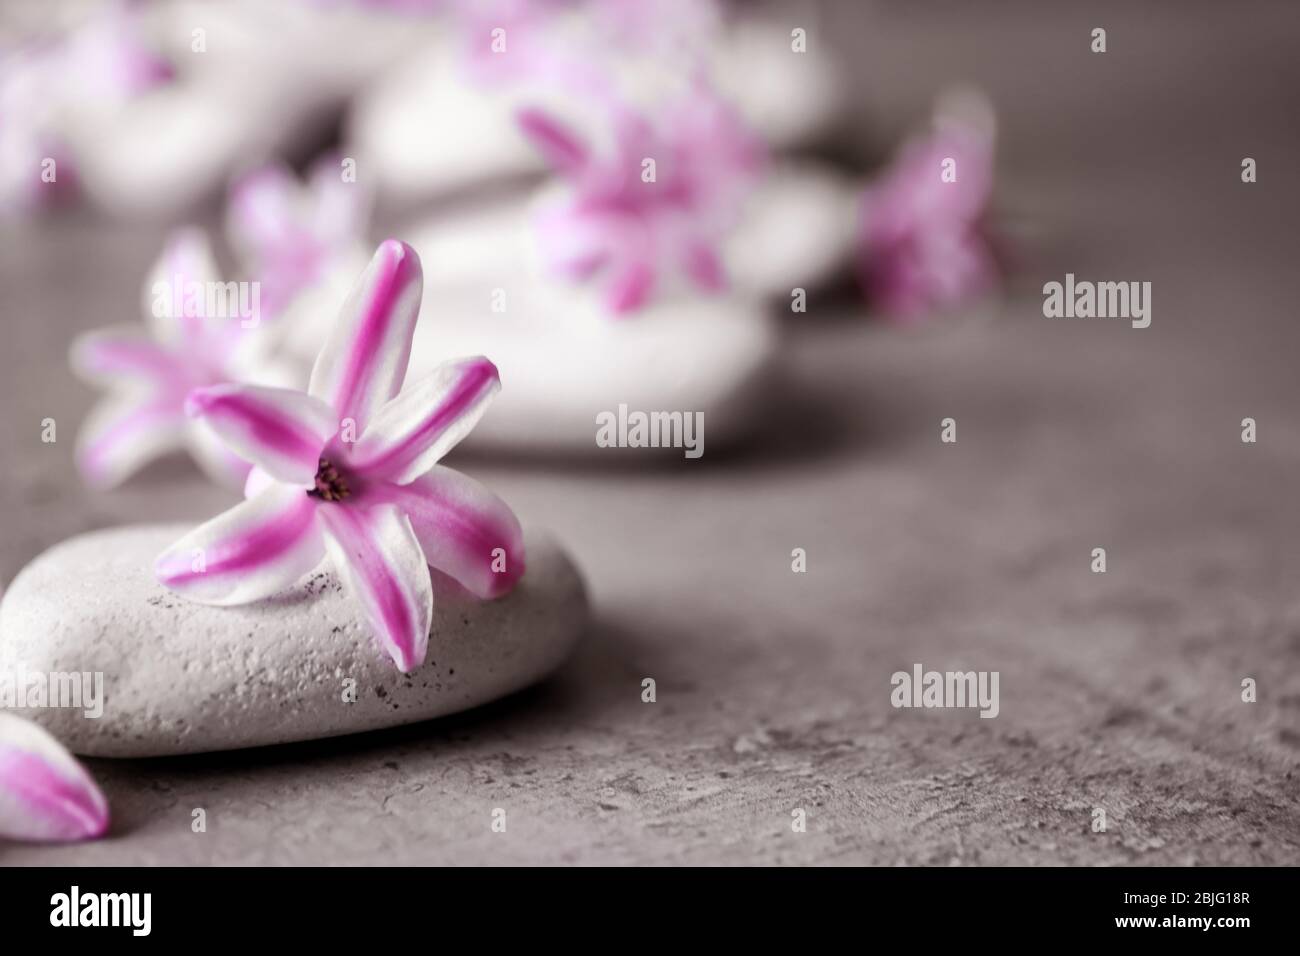 Spa stones and hyacinth on gray table Stock Photo